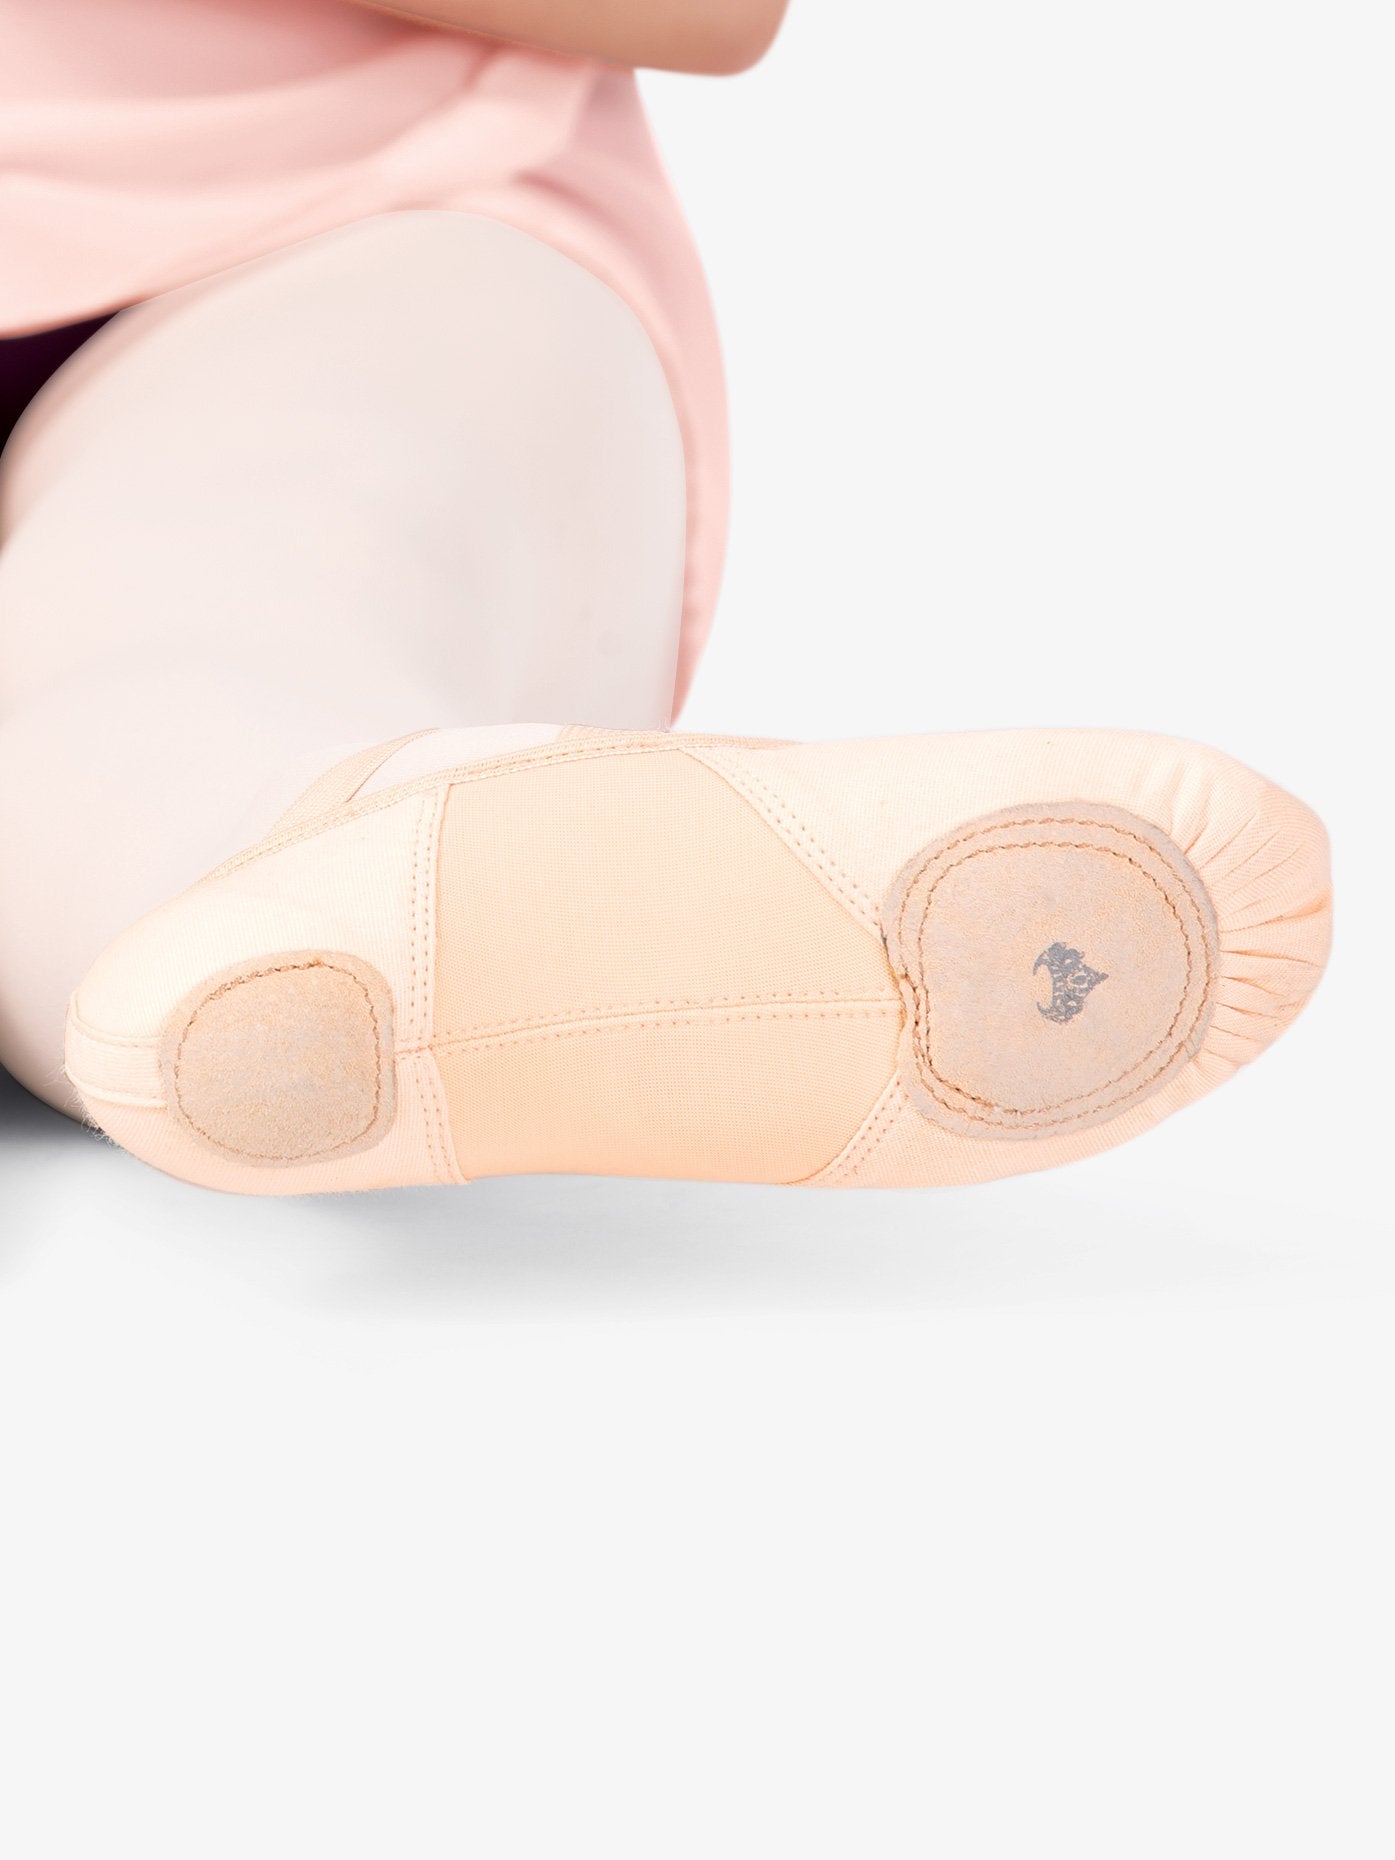 Women's canvas ballet shoes with nylon spandex insert and split sole for optimal flexibility and comfort